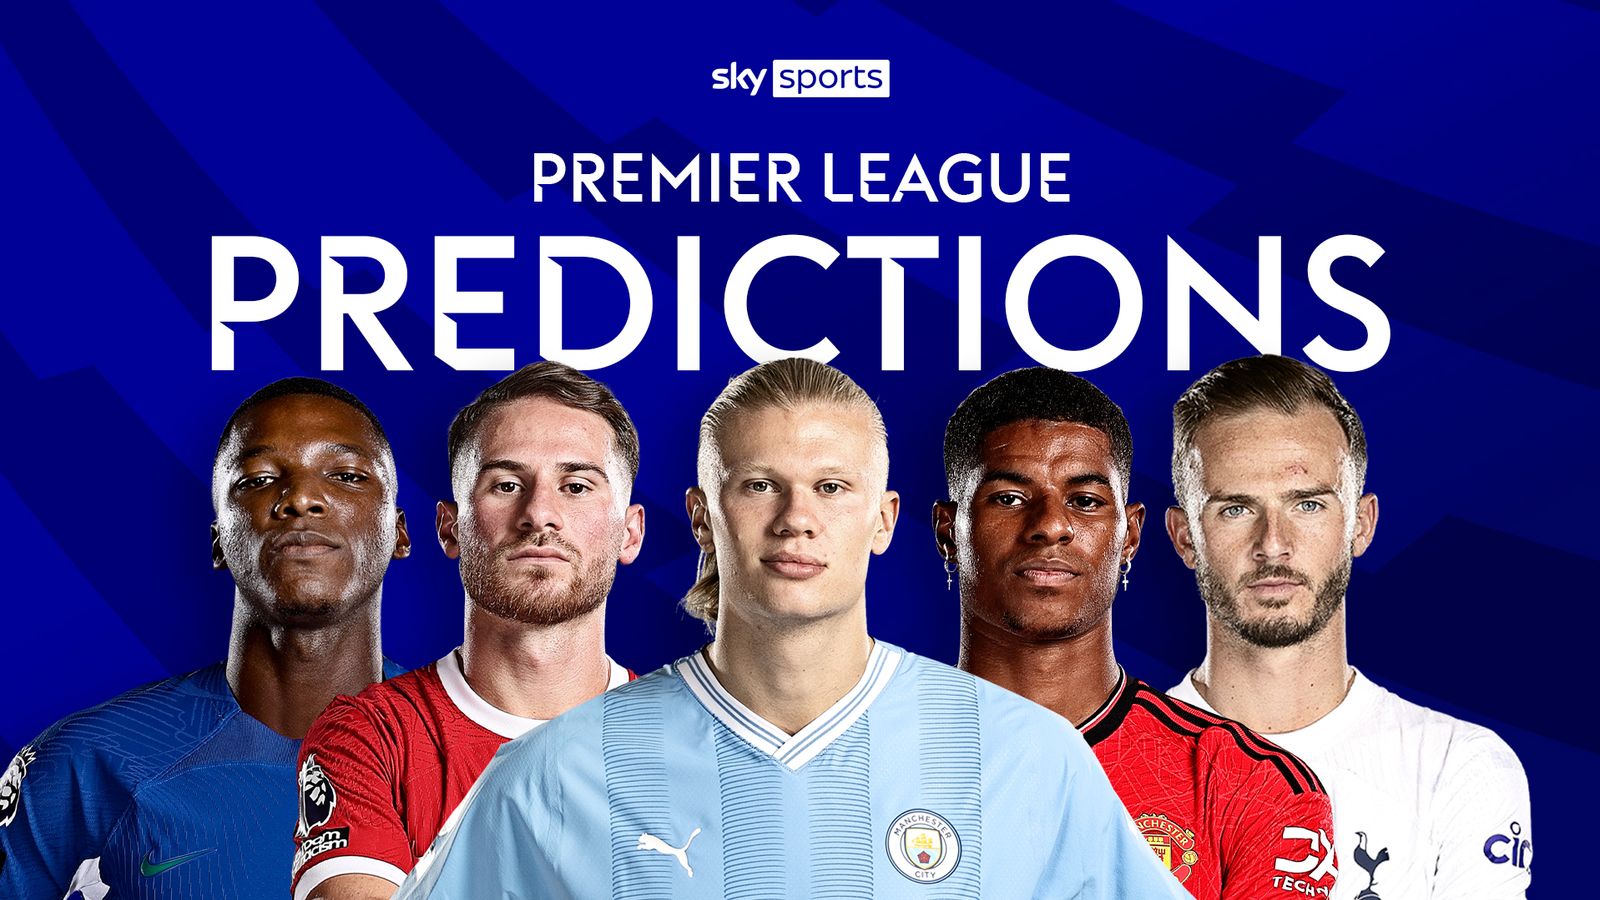 Premier League predictions: Brighton to wobble Man City | Arsenal's 'savage' defence too stubborn for Chelsea